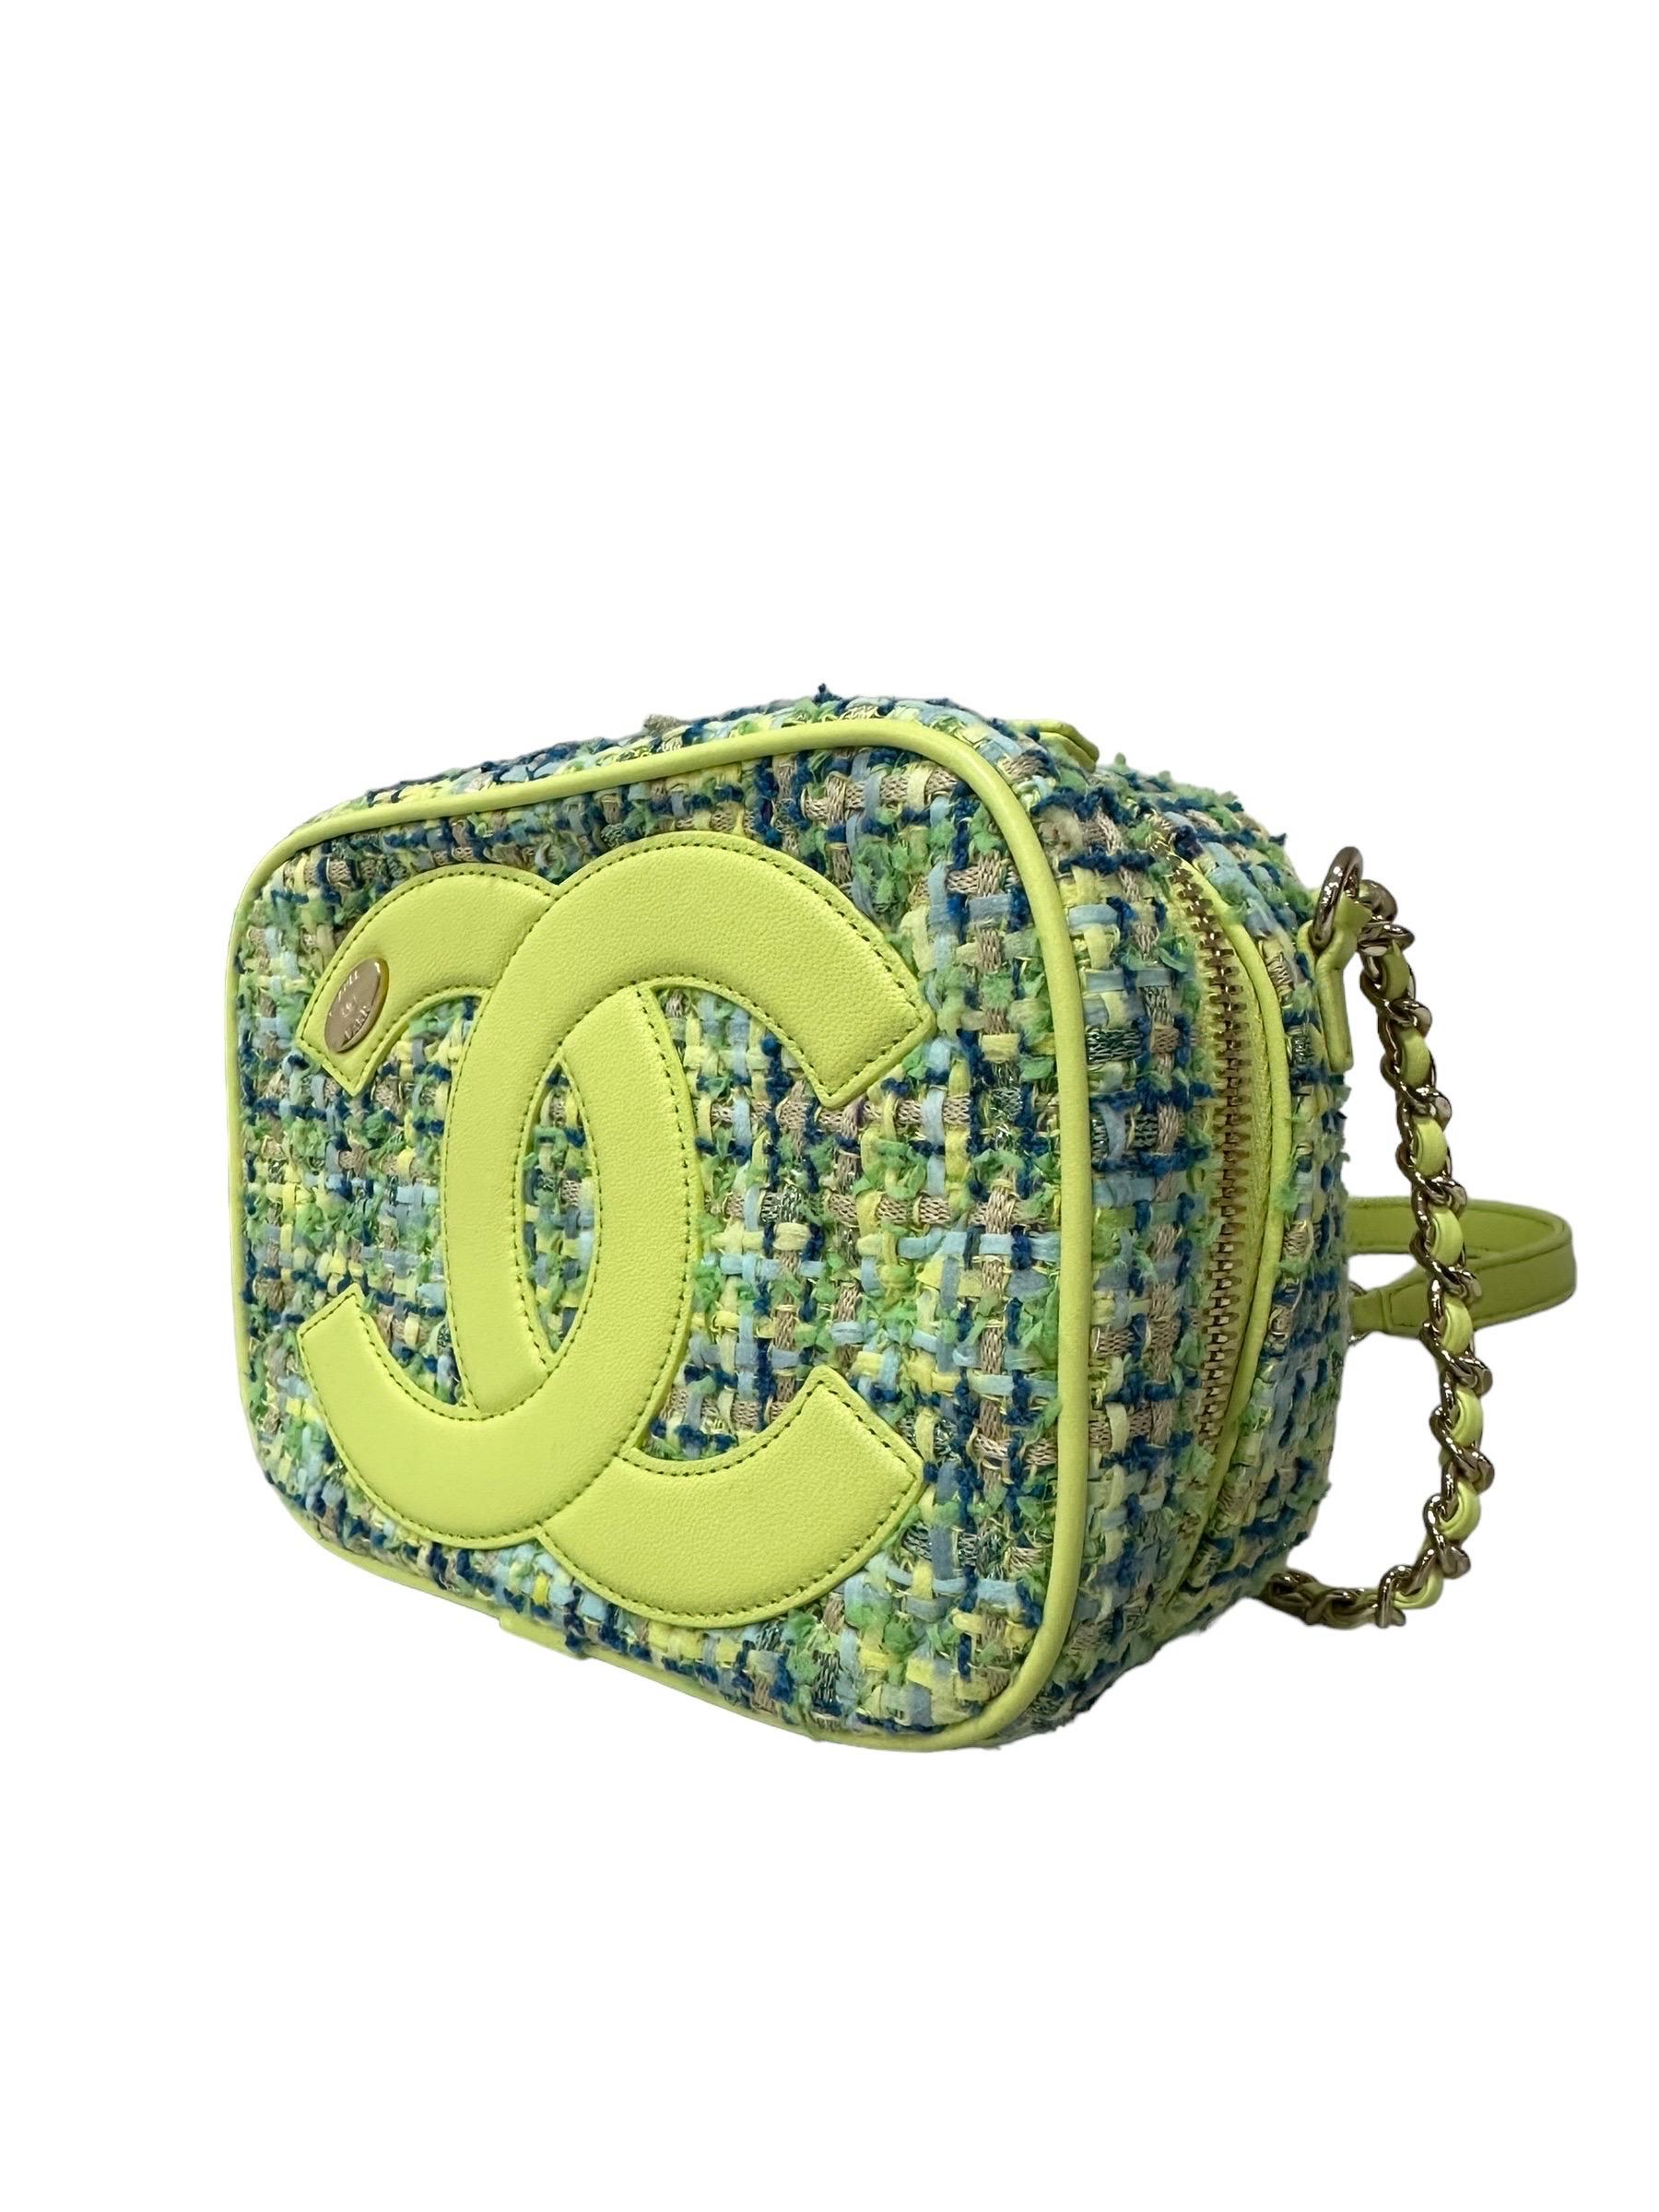 Borsa A Tracolla Chanel Camera Bag Tweed Lime 2019 In Excellent Condition For Sale In Torre Del Greco, IT